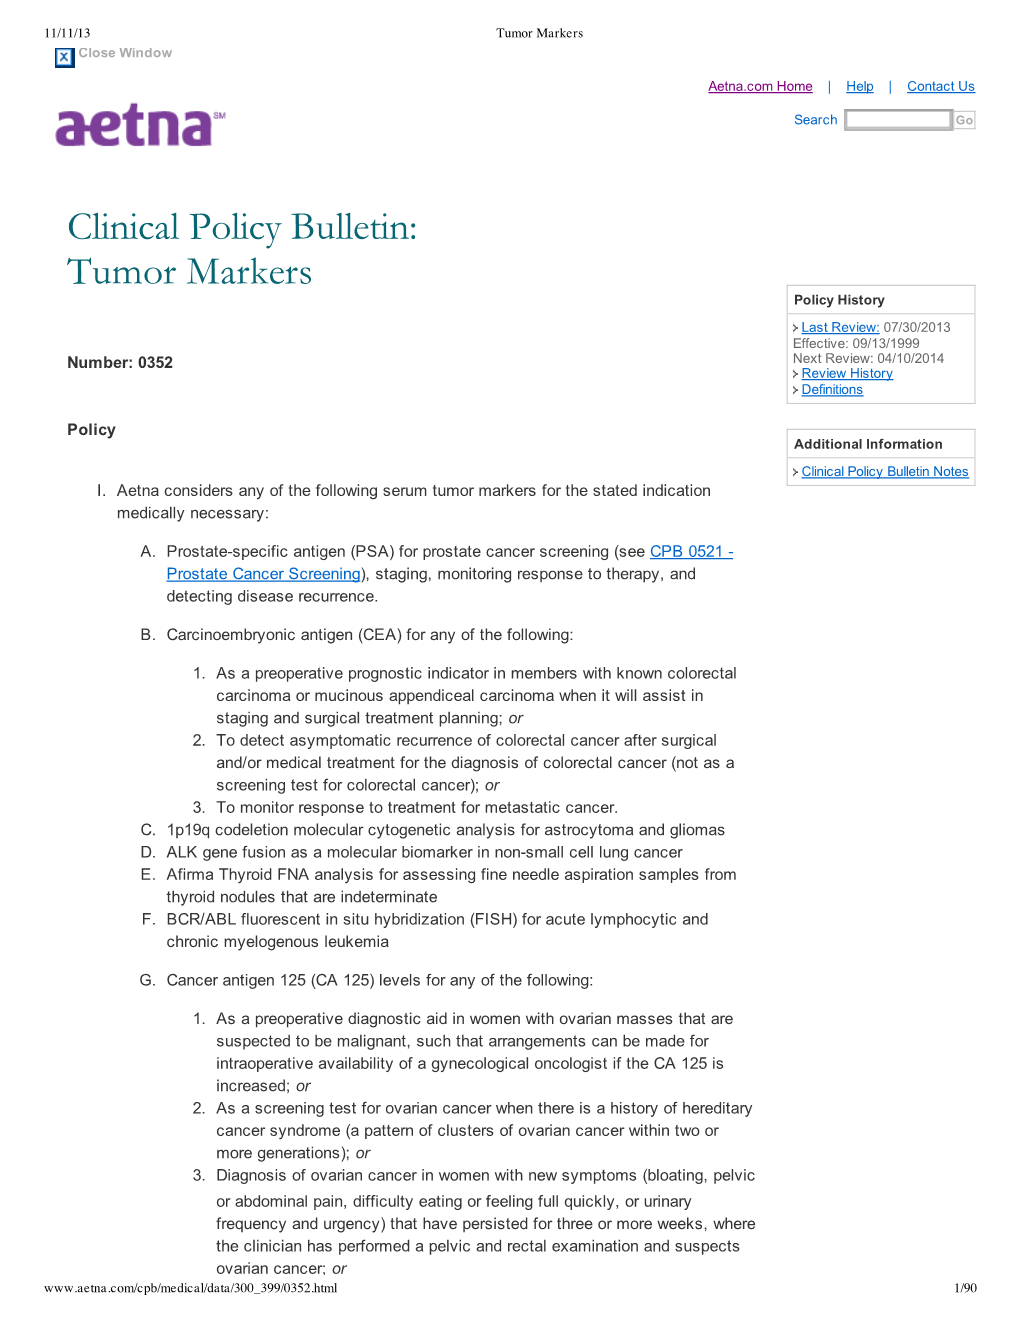 Clinical Policy Bulletin: Tumor Markers Policy History Last Review: 07/30/2013 Effective: 09/13/1999 Number: 0352 Next Review: 04/10/2014 Review History Definitions